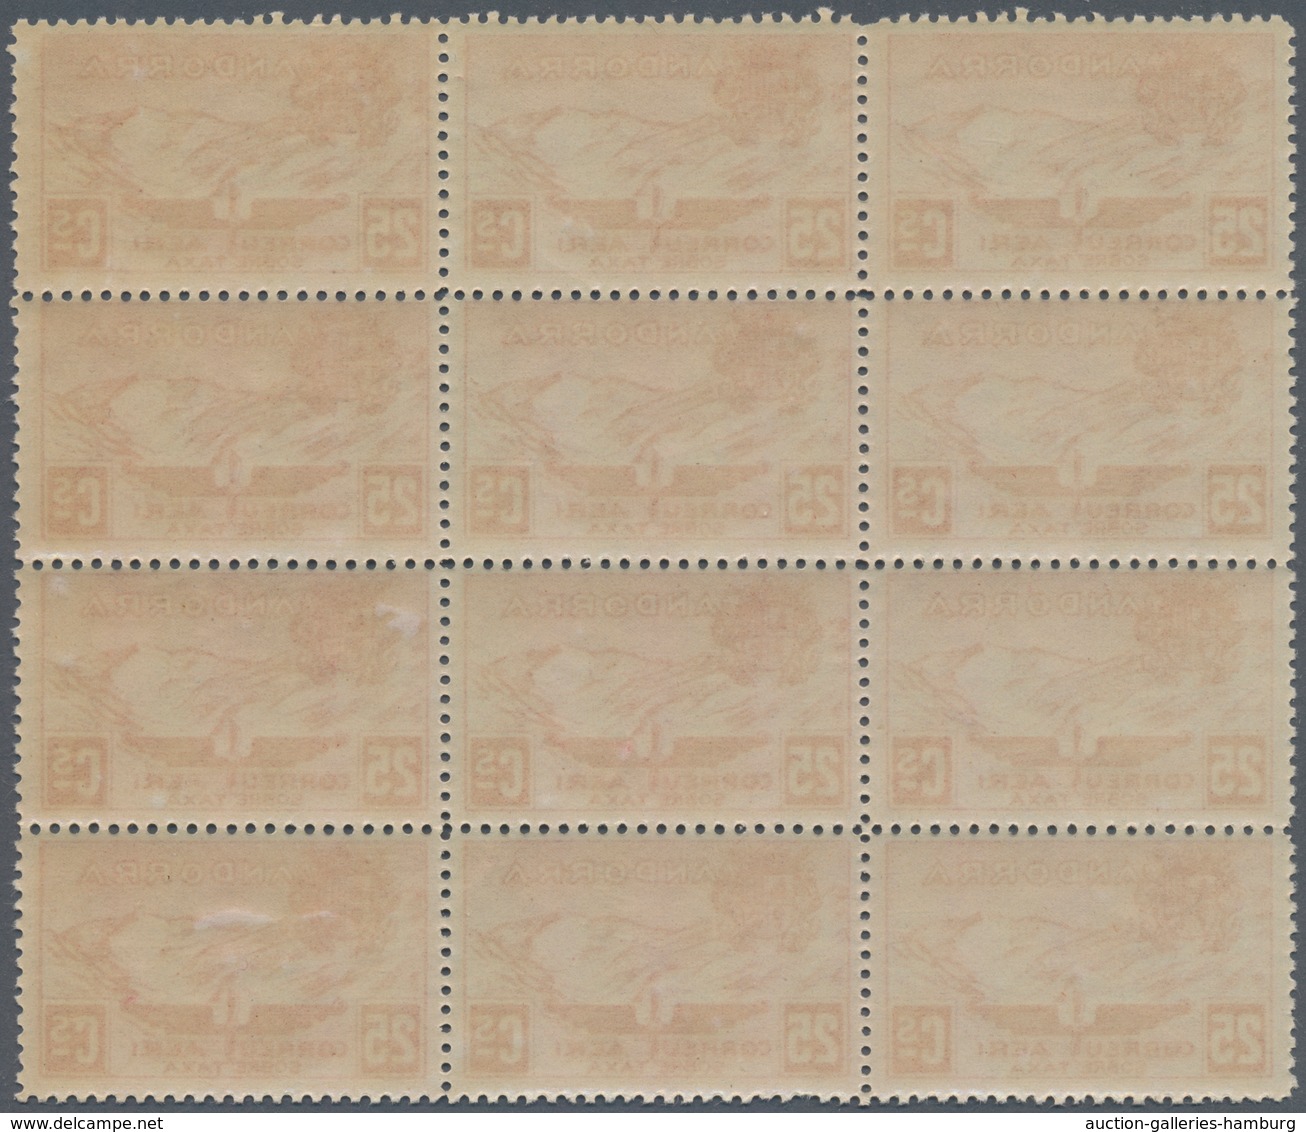 Andorra - Spanische Post: 1932, not issued airmail set of 12 in blocks of twelve, mint never hinged